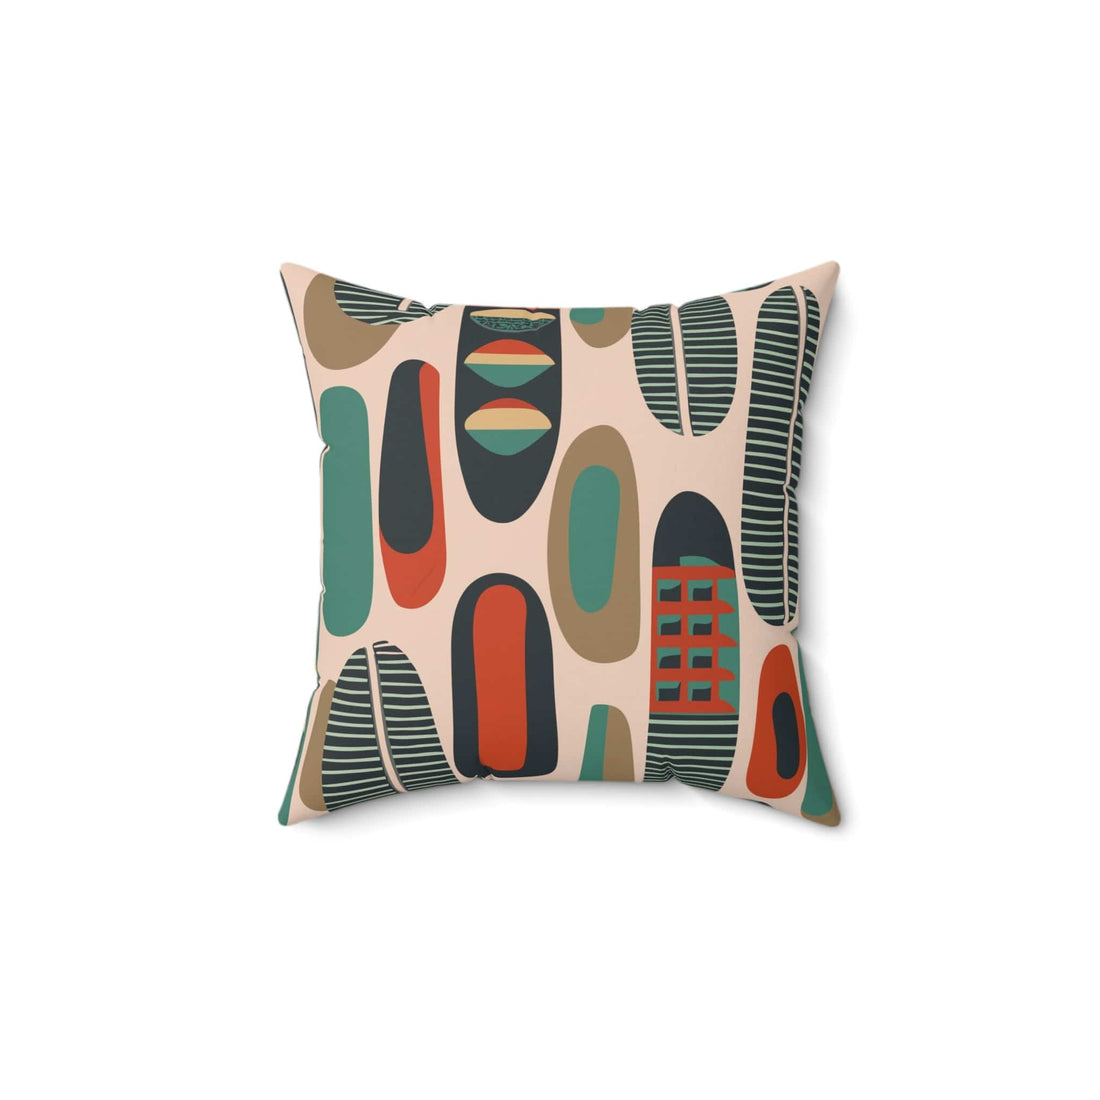 Kate McEnroe New York MCM Abstract Throw Pillow, Retro Chic Cushion Cover, Organic Shapes Pillow Sham, Mid-Century Modernist Decor Throw Pillows 14&quot; × 14&quot; 31889070447636397790